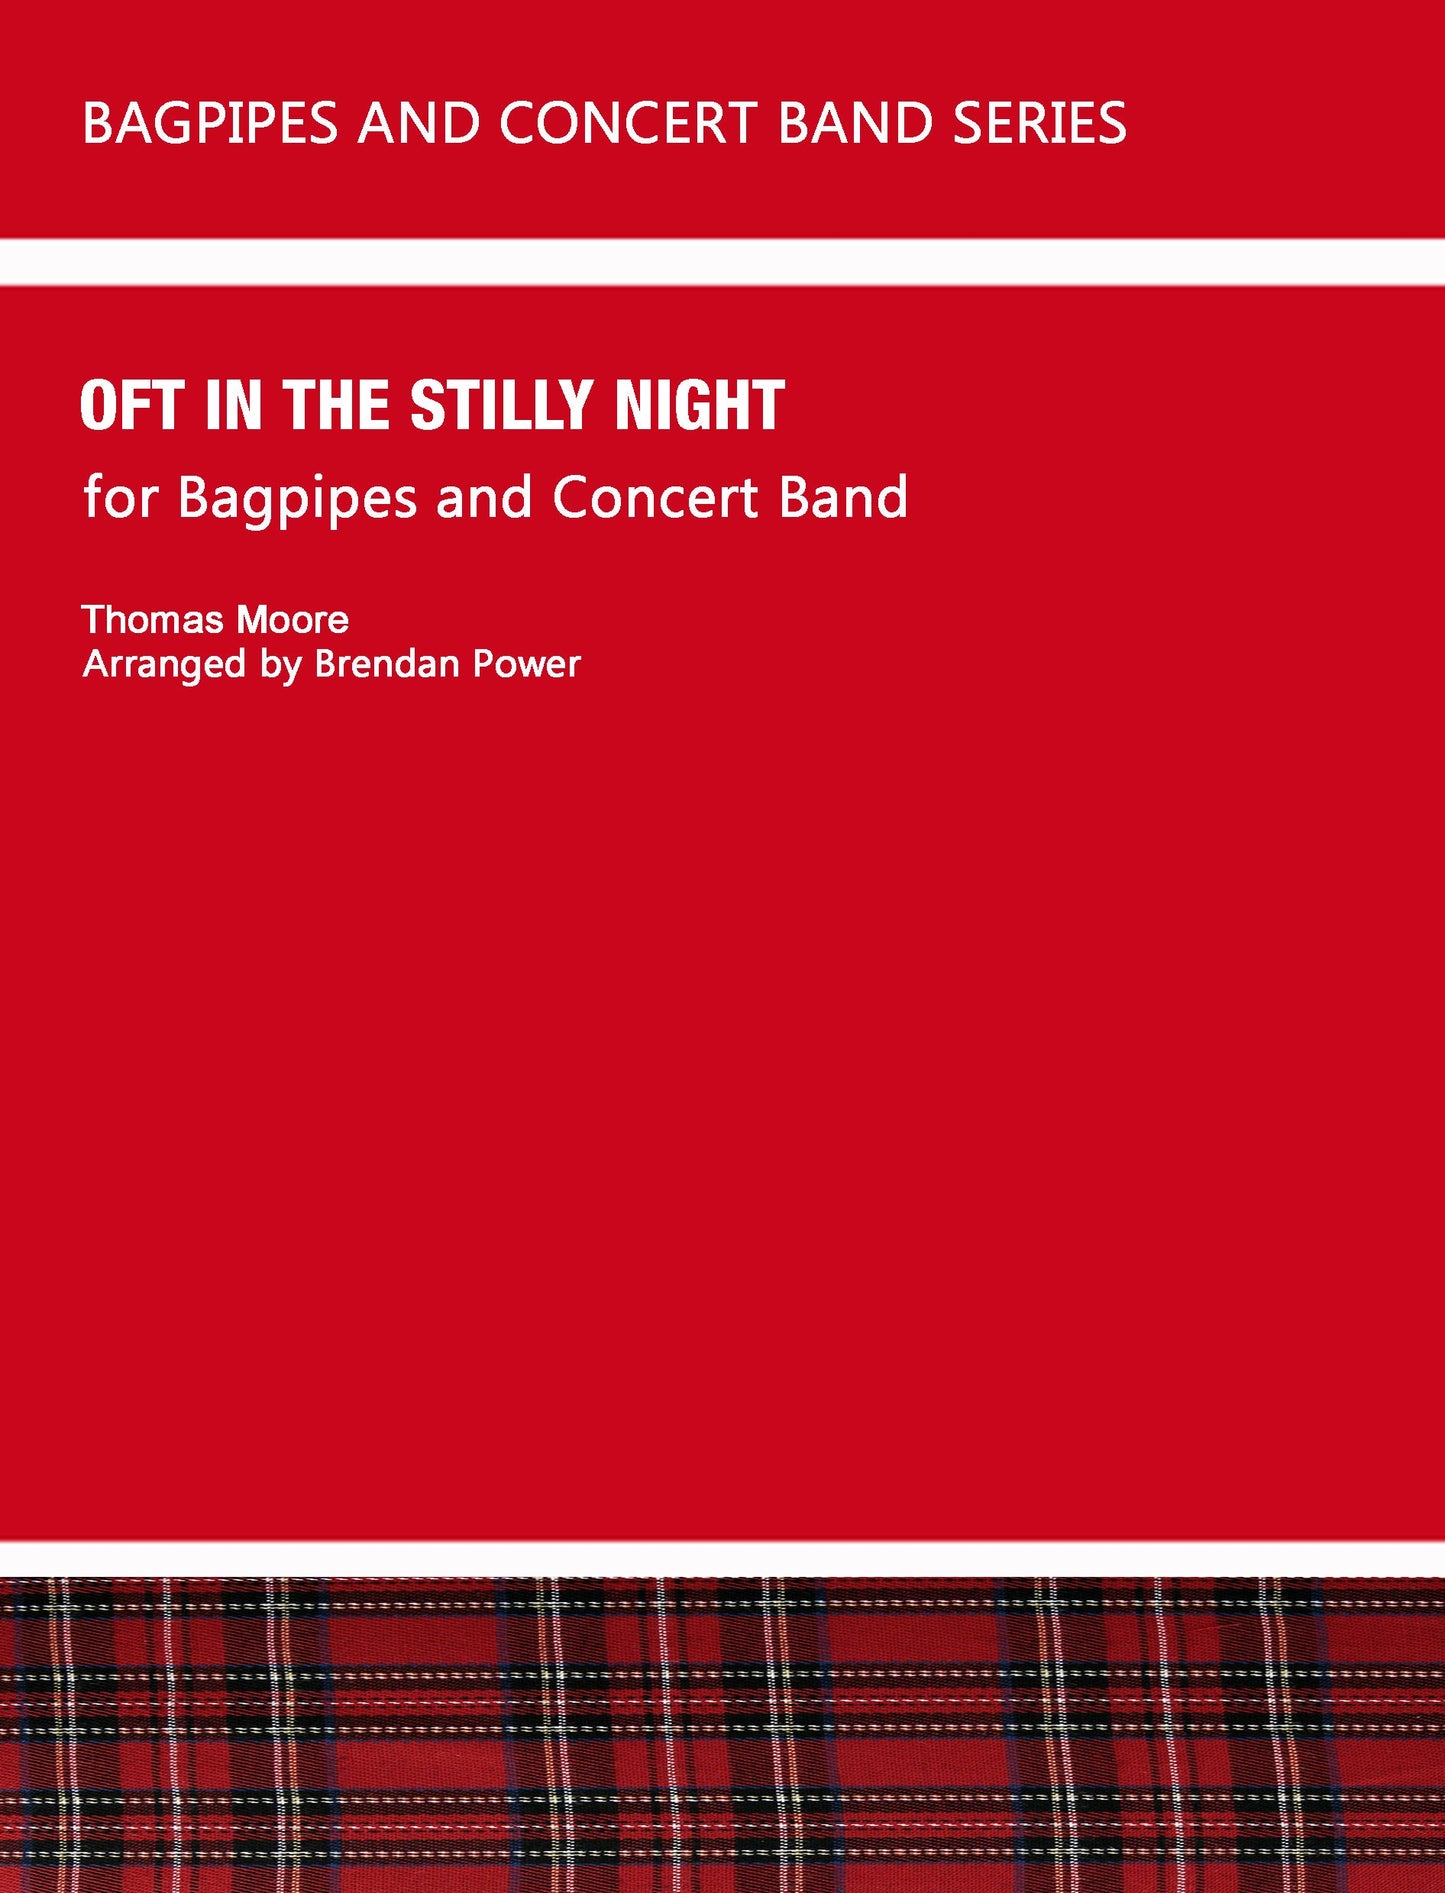 oft-in-the-stilly-night-bagpipes-concert-band-sheet-music